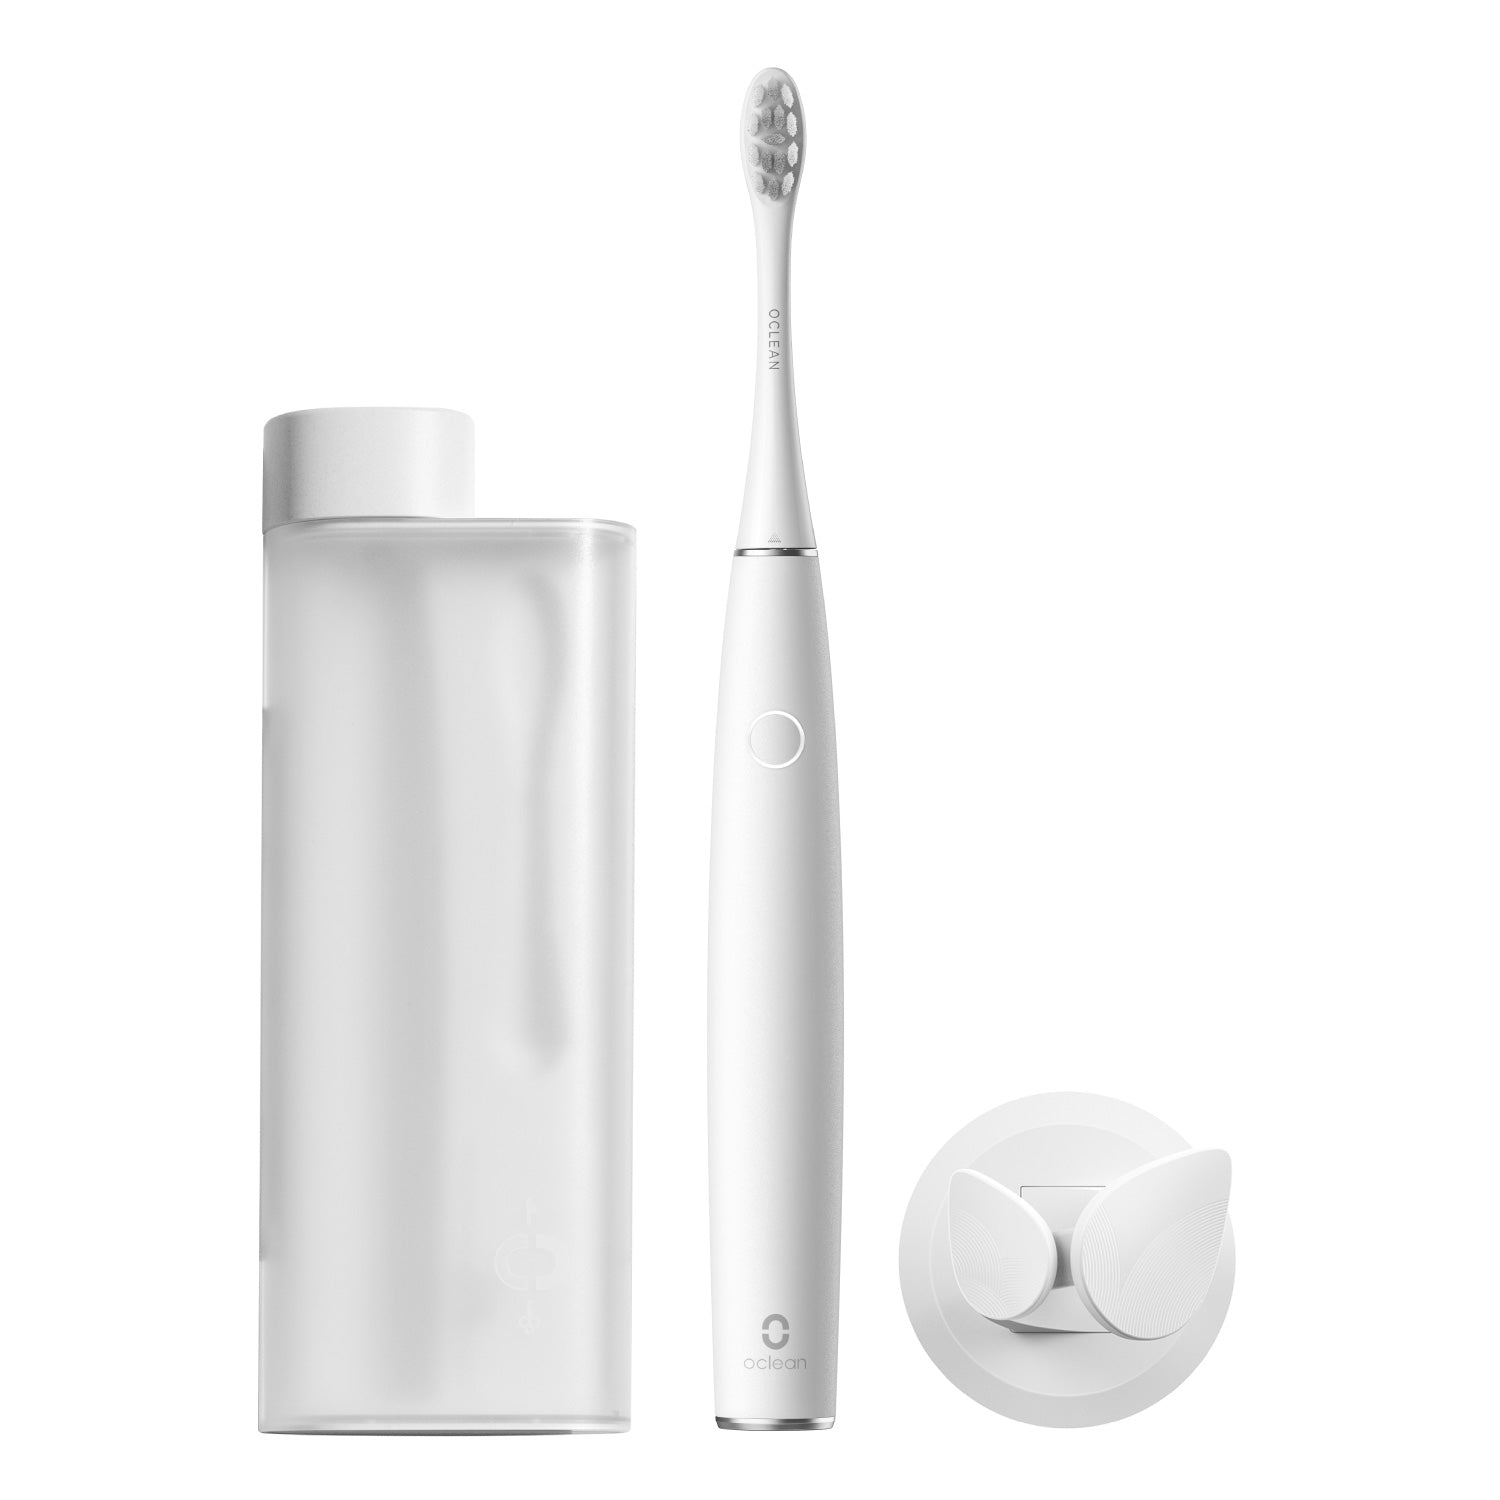 Oclean Air 2T Sonic Electric Toothbrush Toothbrushes White  Oclean US Store